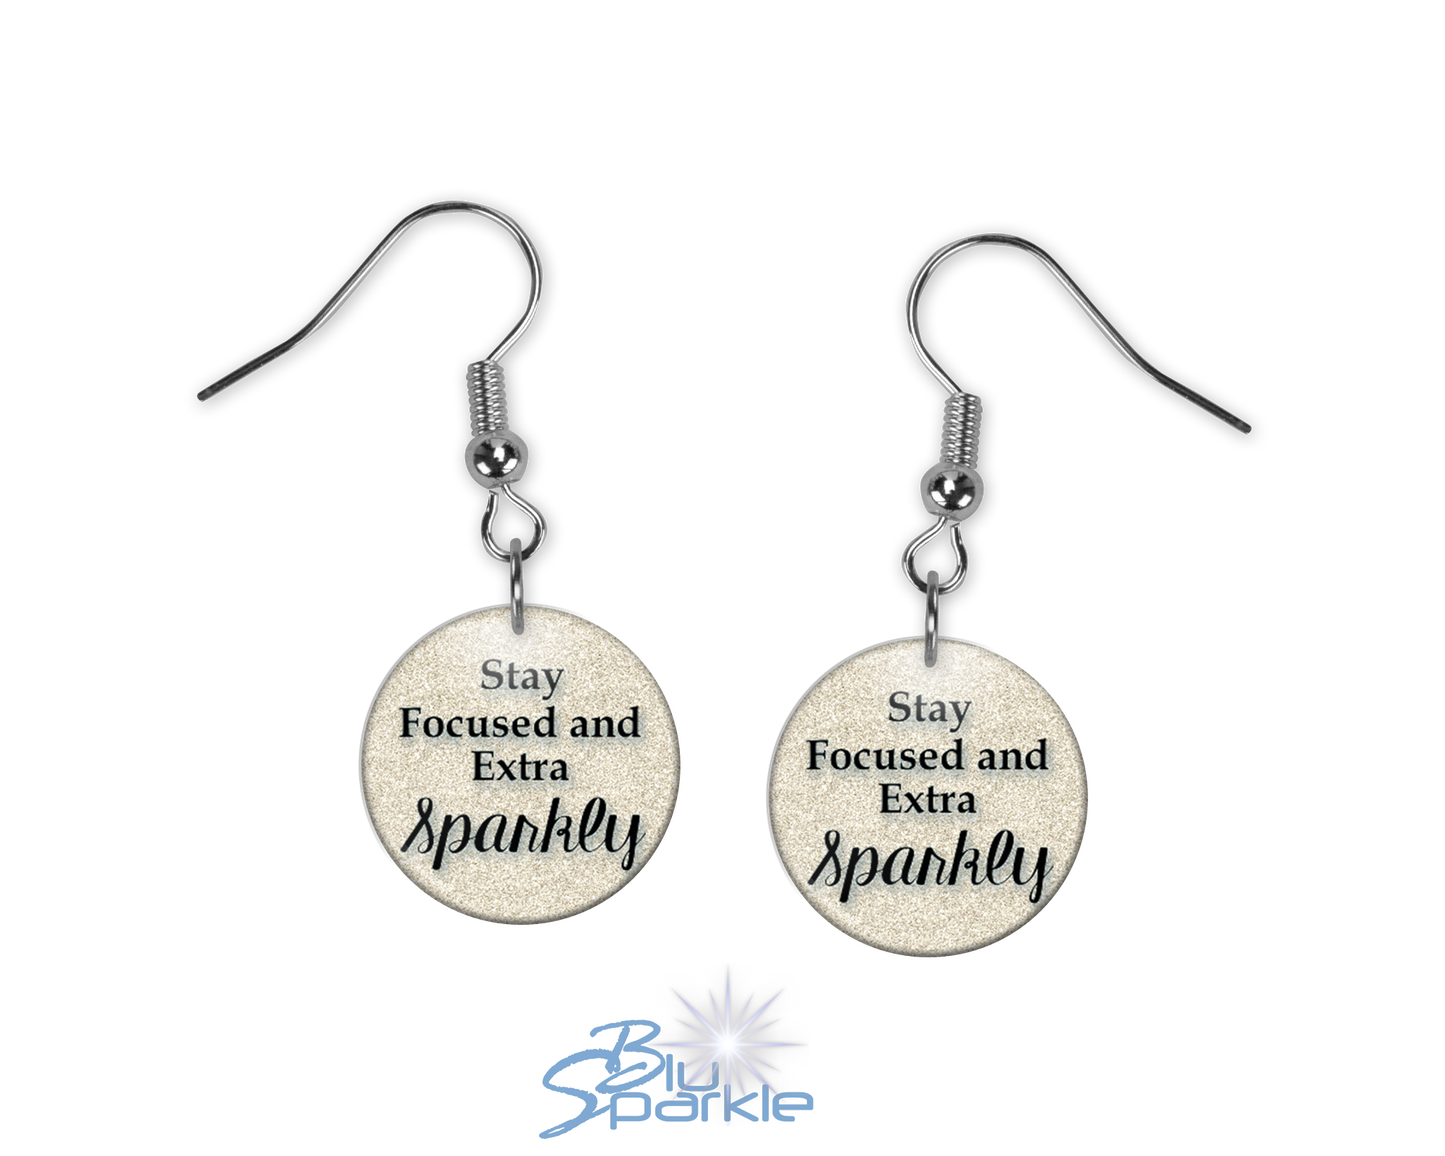 Stay Focused and Extra Sparkly - Earrings